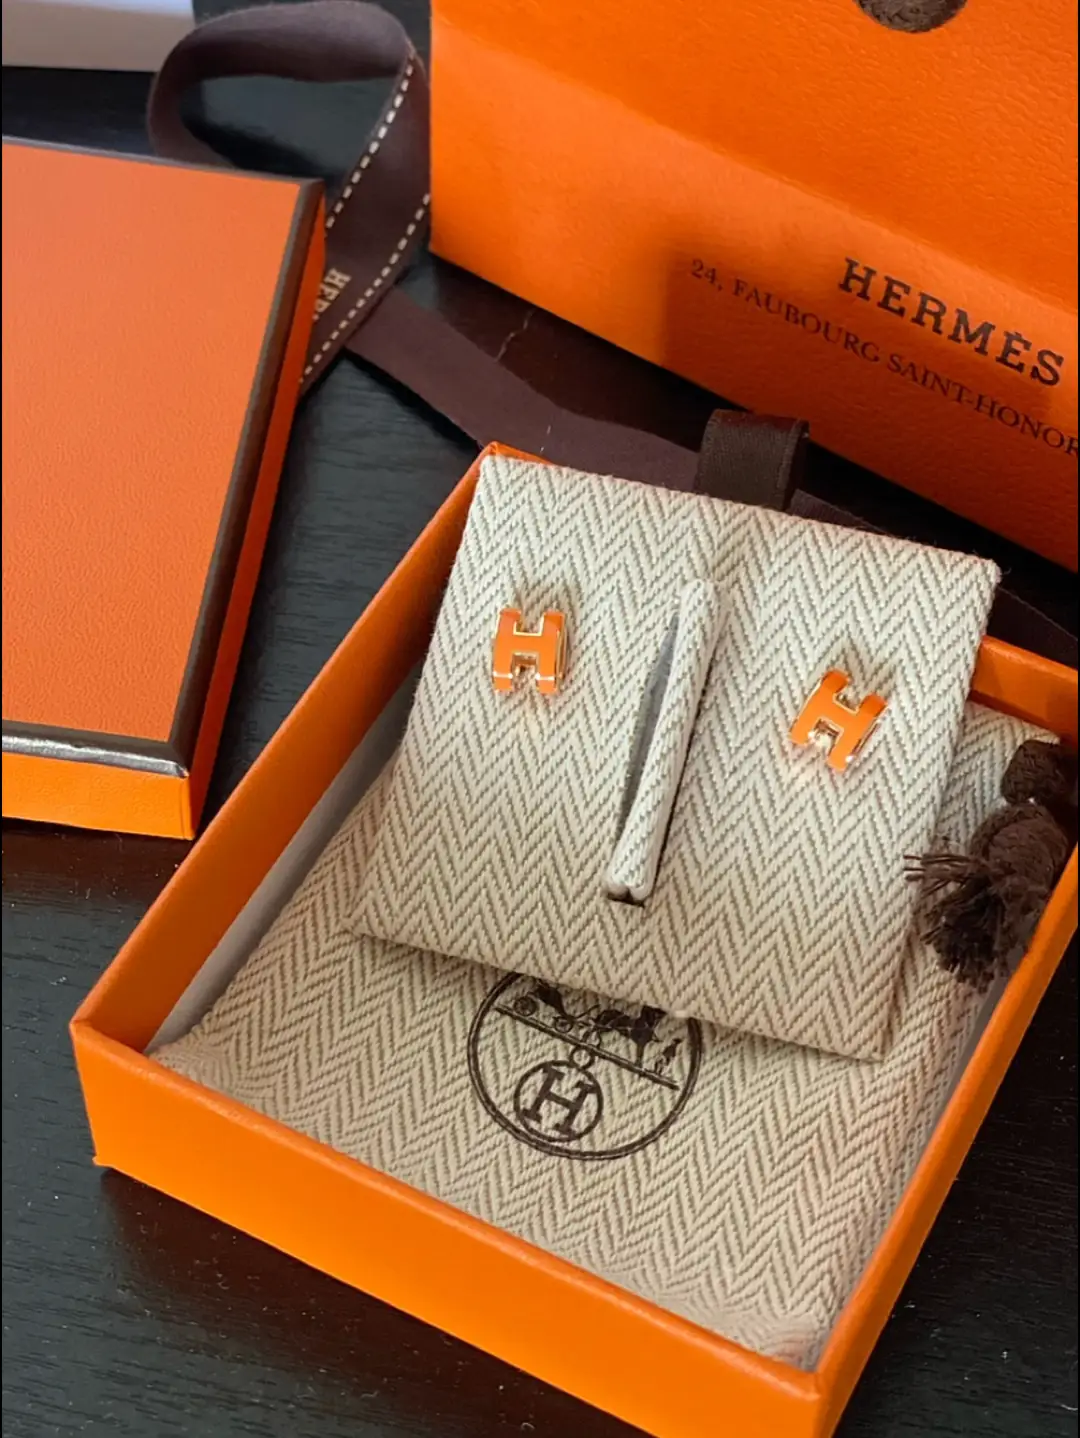 JUST IN Authentic Hermes Collection Hermessence Box, Dustbag and Ribbon